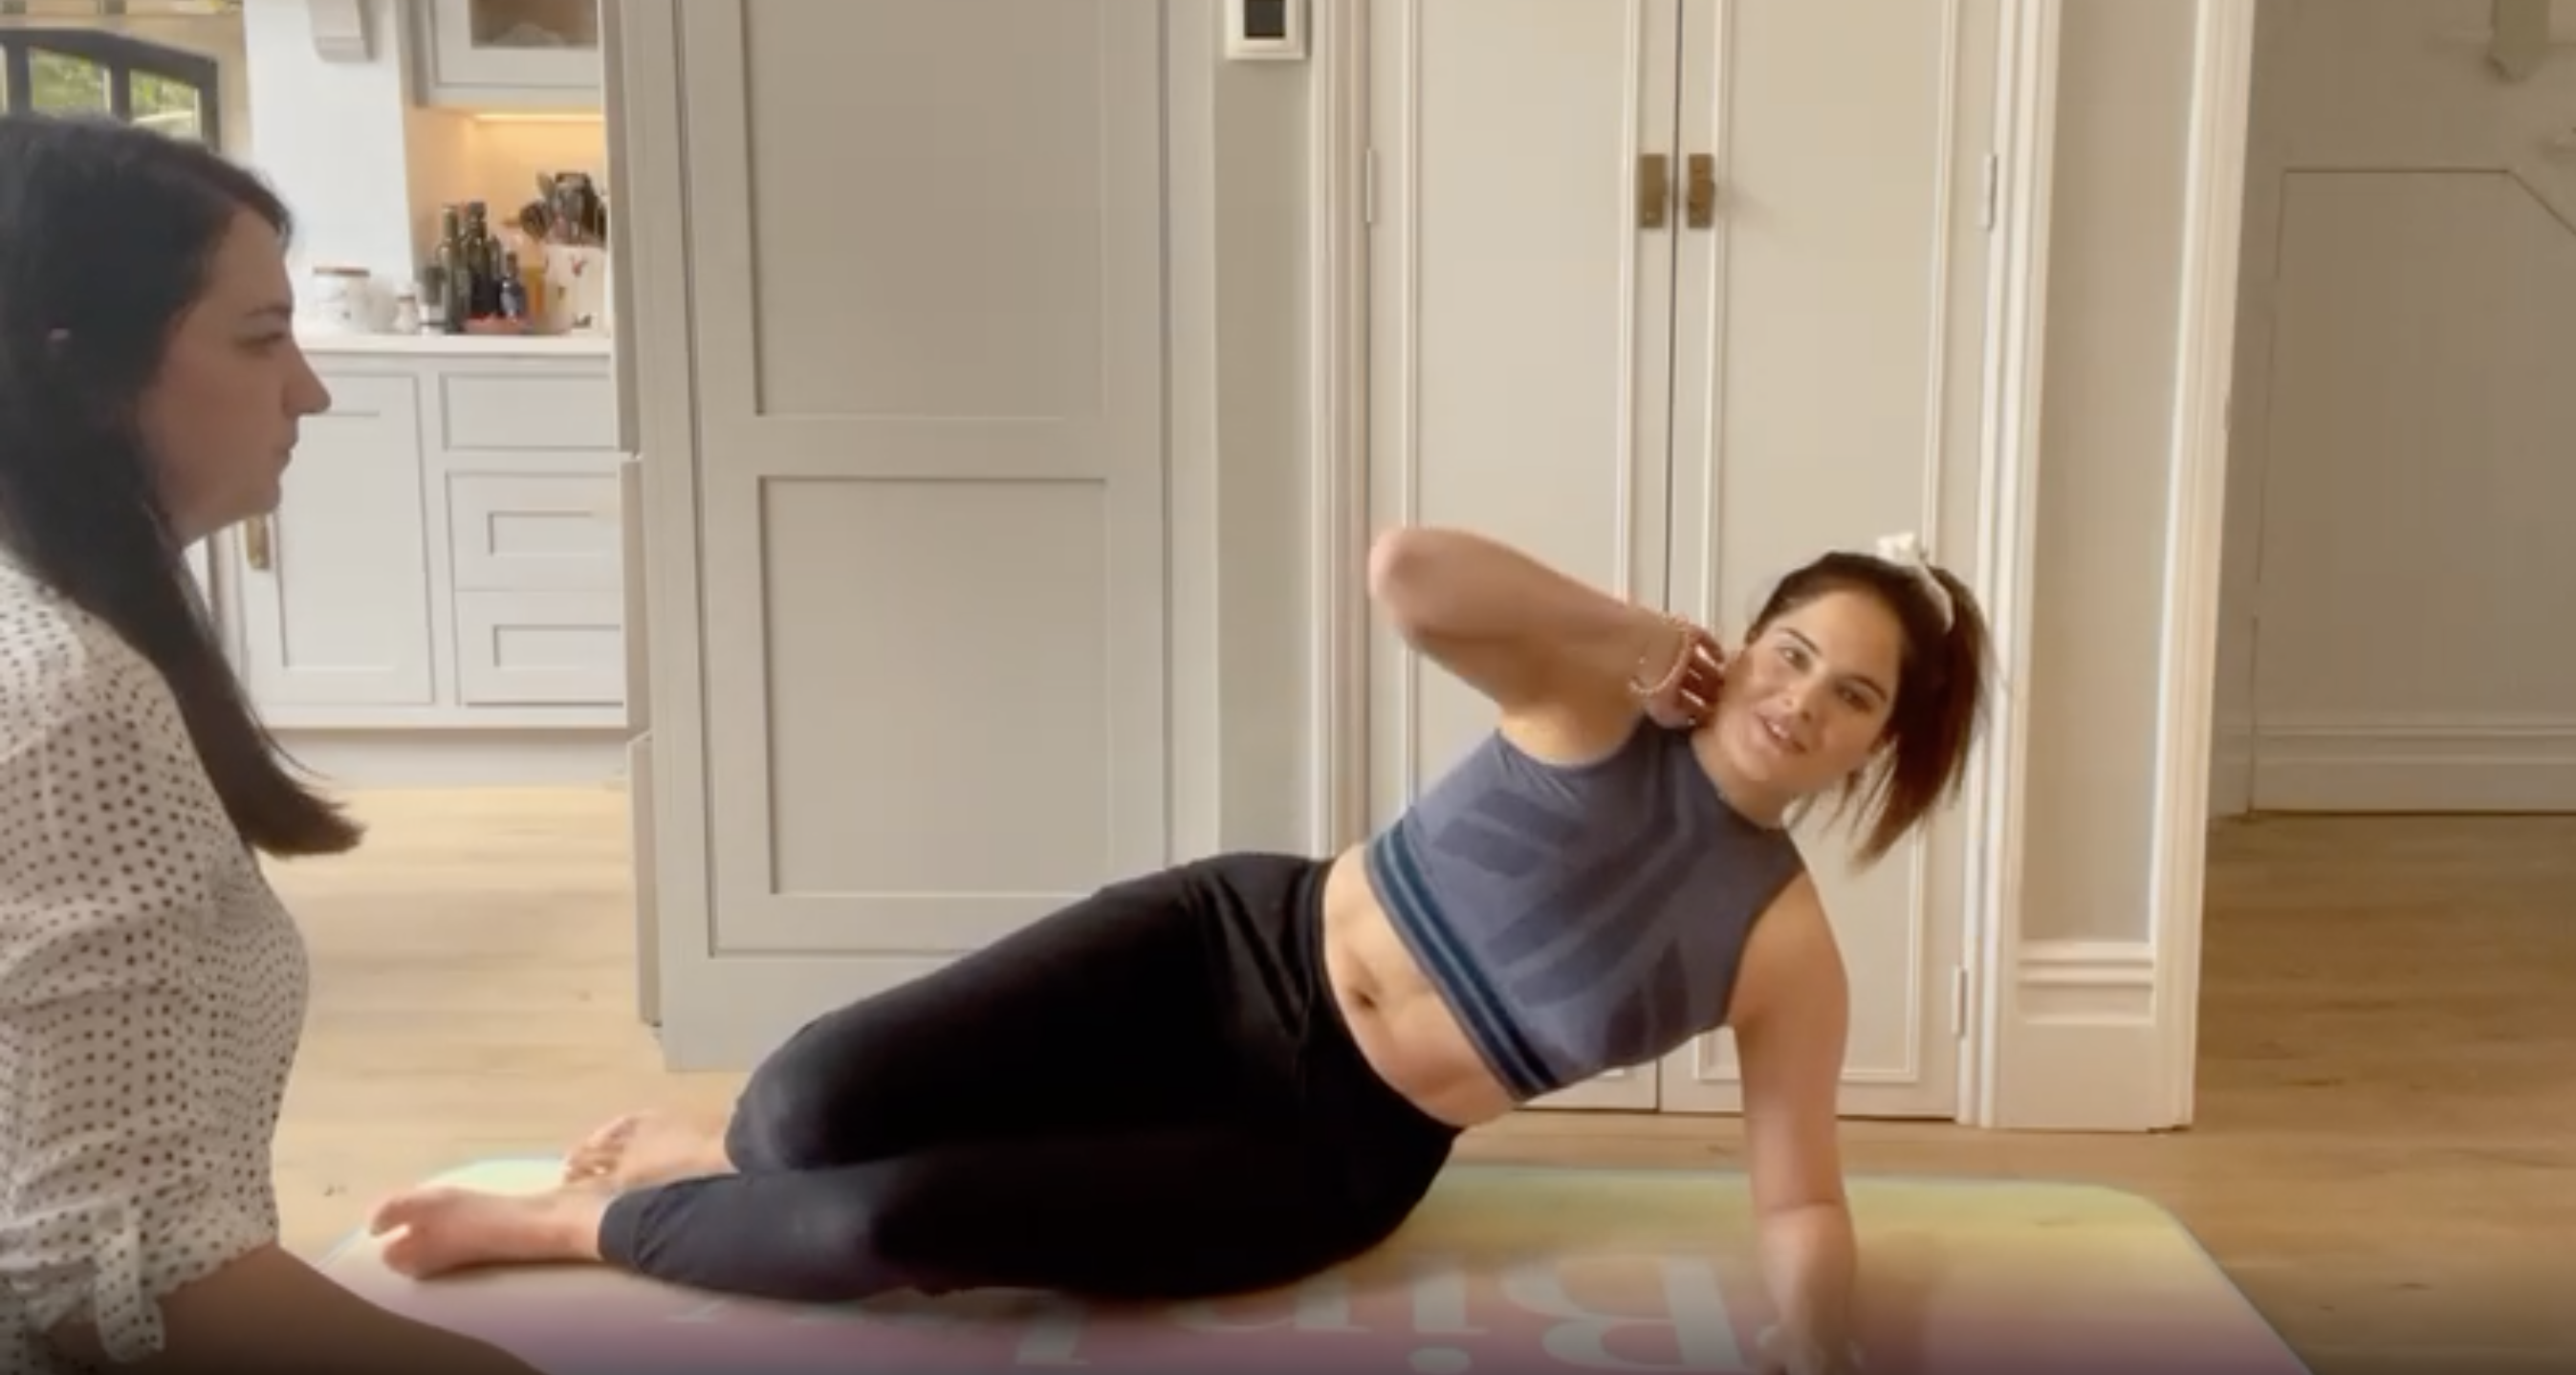 Post partum pelvic health check exercises with Binky Felstead Video